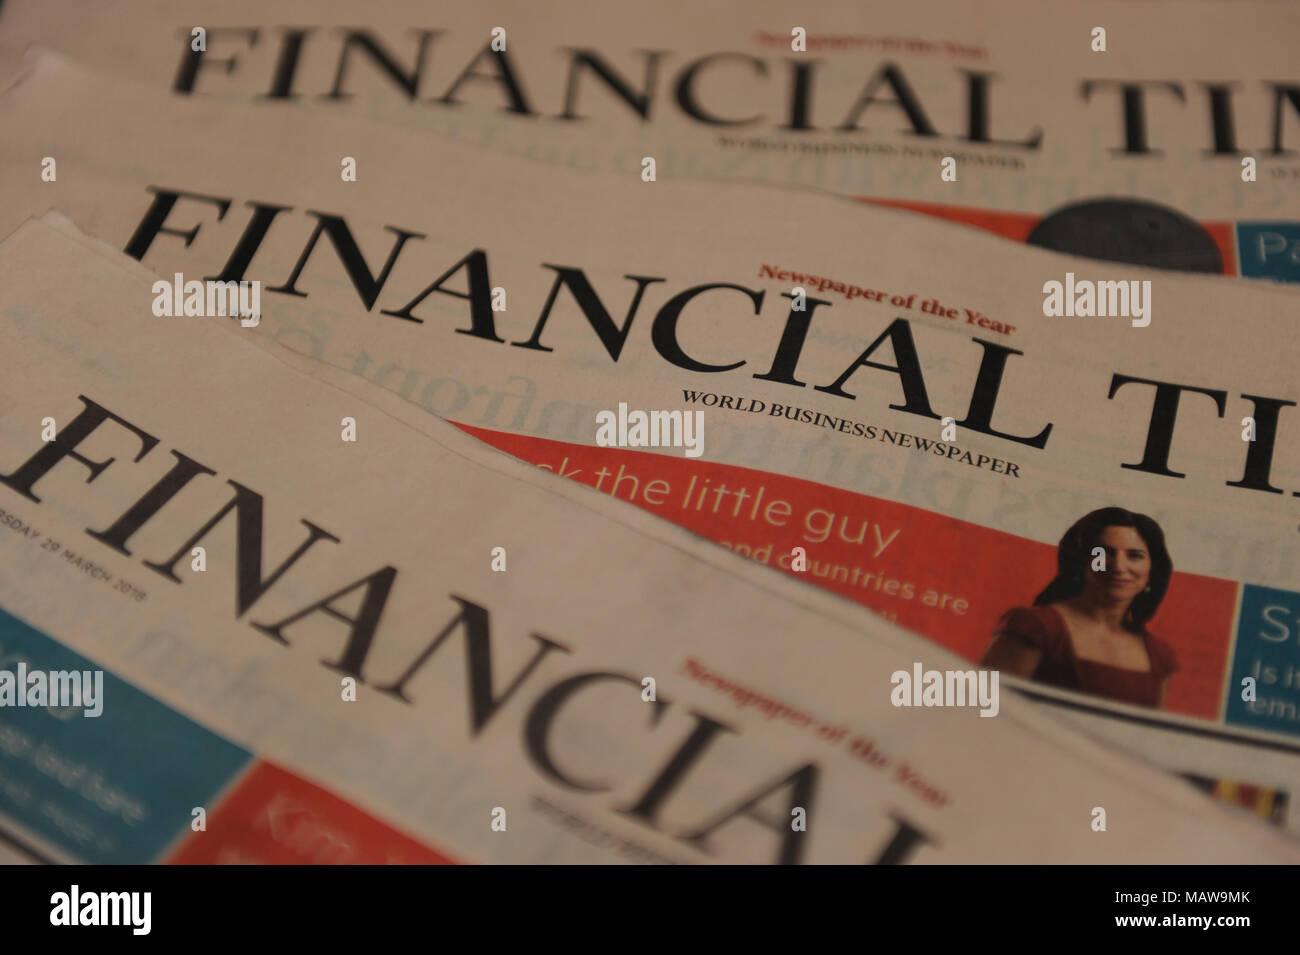 Print editions of The Financial Times newspaper, The Financial Times is owned by Nikkei Stock Photo